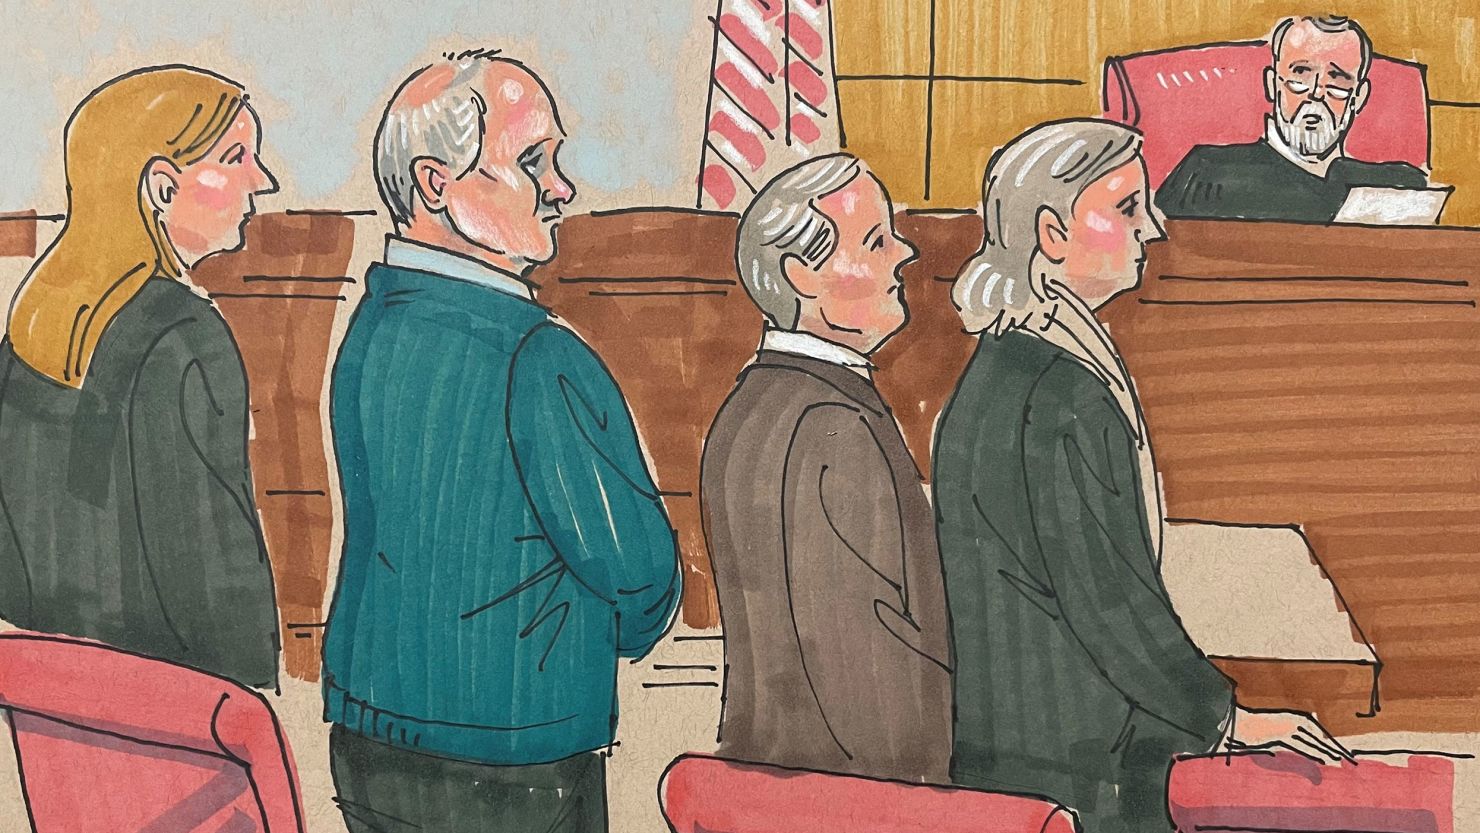 Robert Bowers was convicted of all 63 counts against him and could face the death penalty for the mass shooting at Pittsburgh's Tree of Life synagogue in 2018.